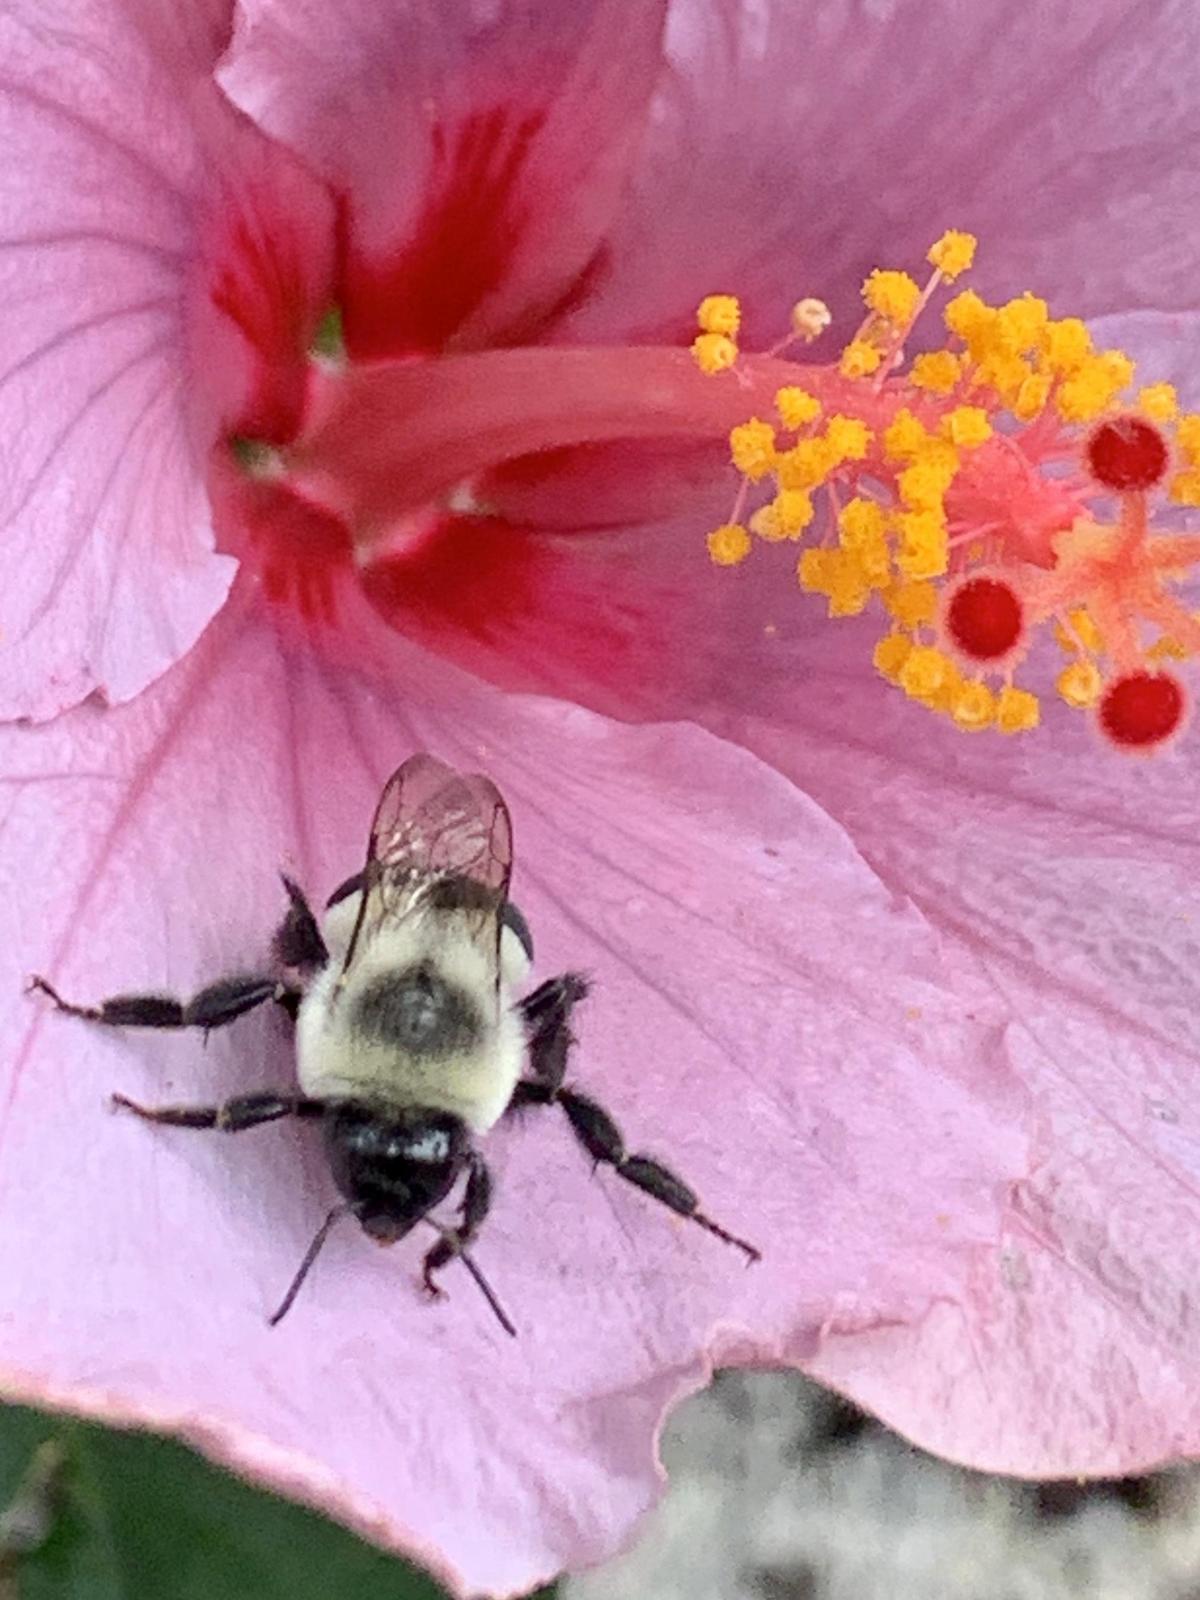 Unknown bumble bee Photo by Susan D’Amico